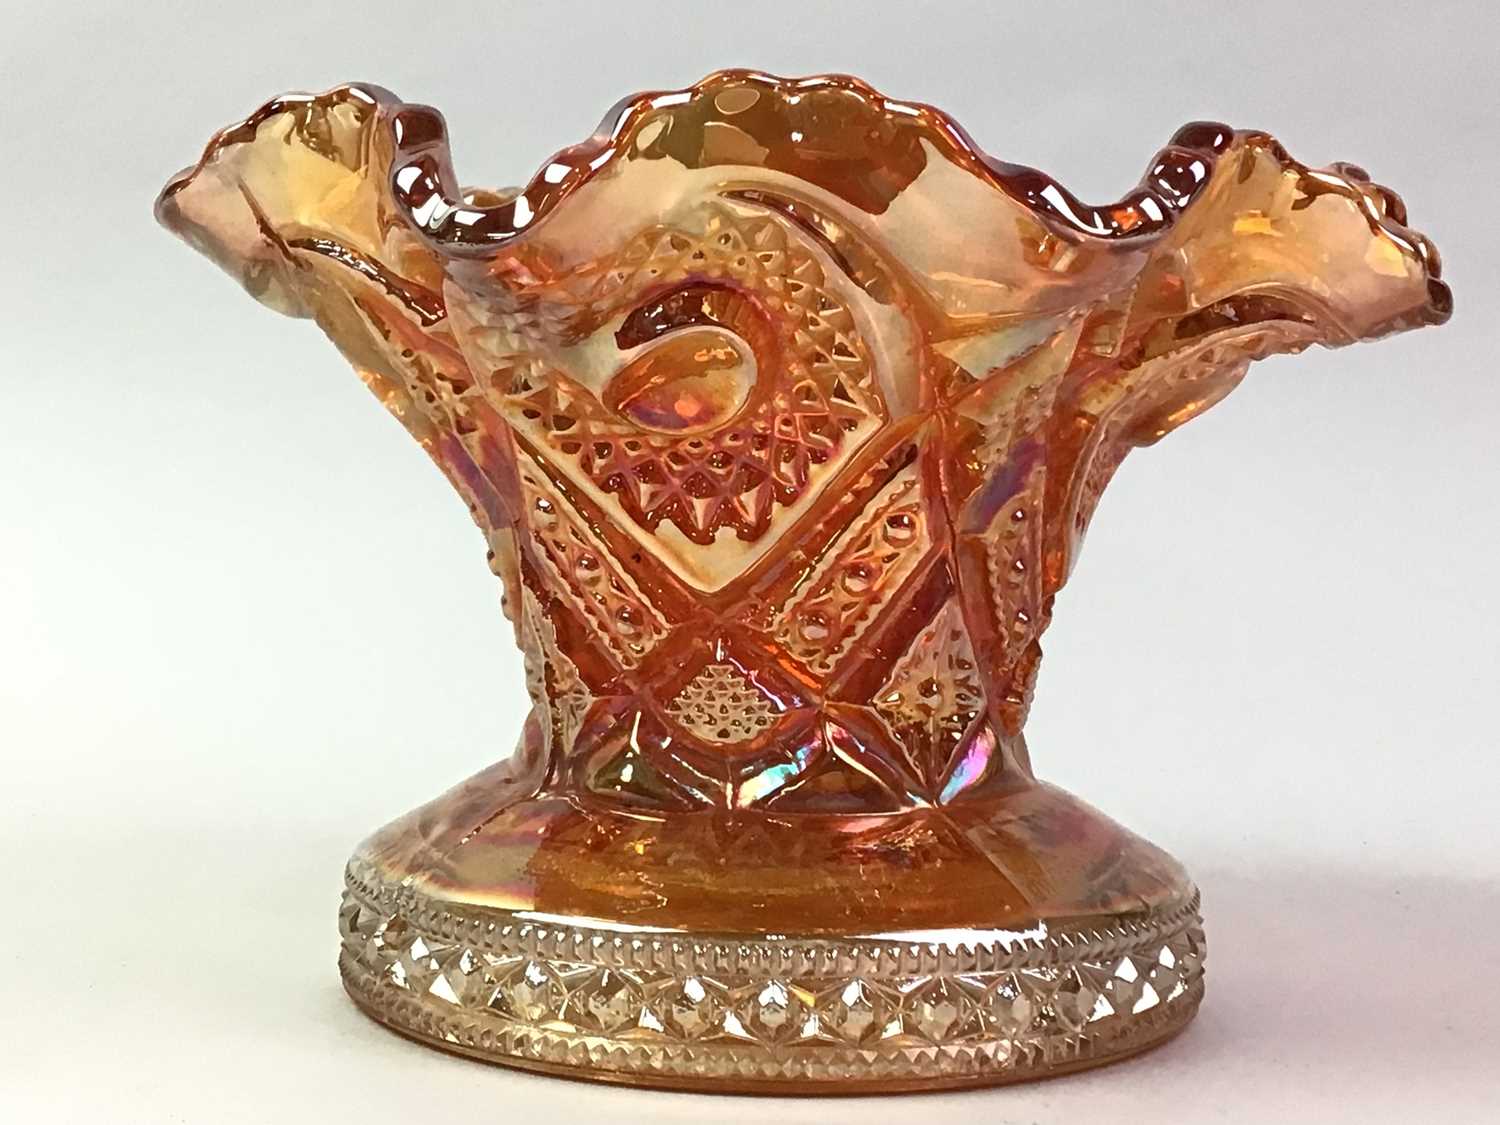 COLLECTION OF CARNIVAL GLASS, EARLY 20TH CENTURY